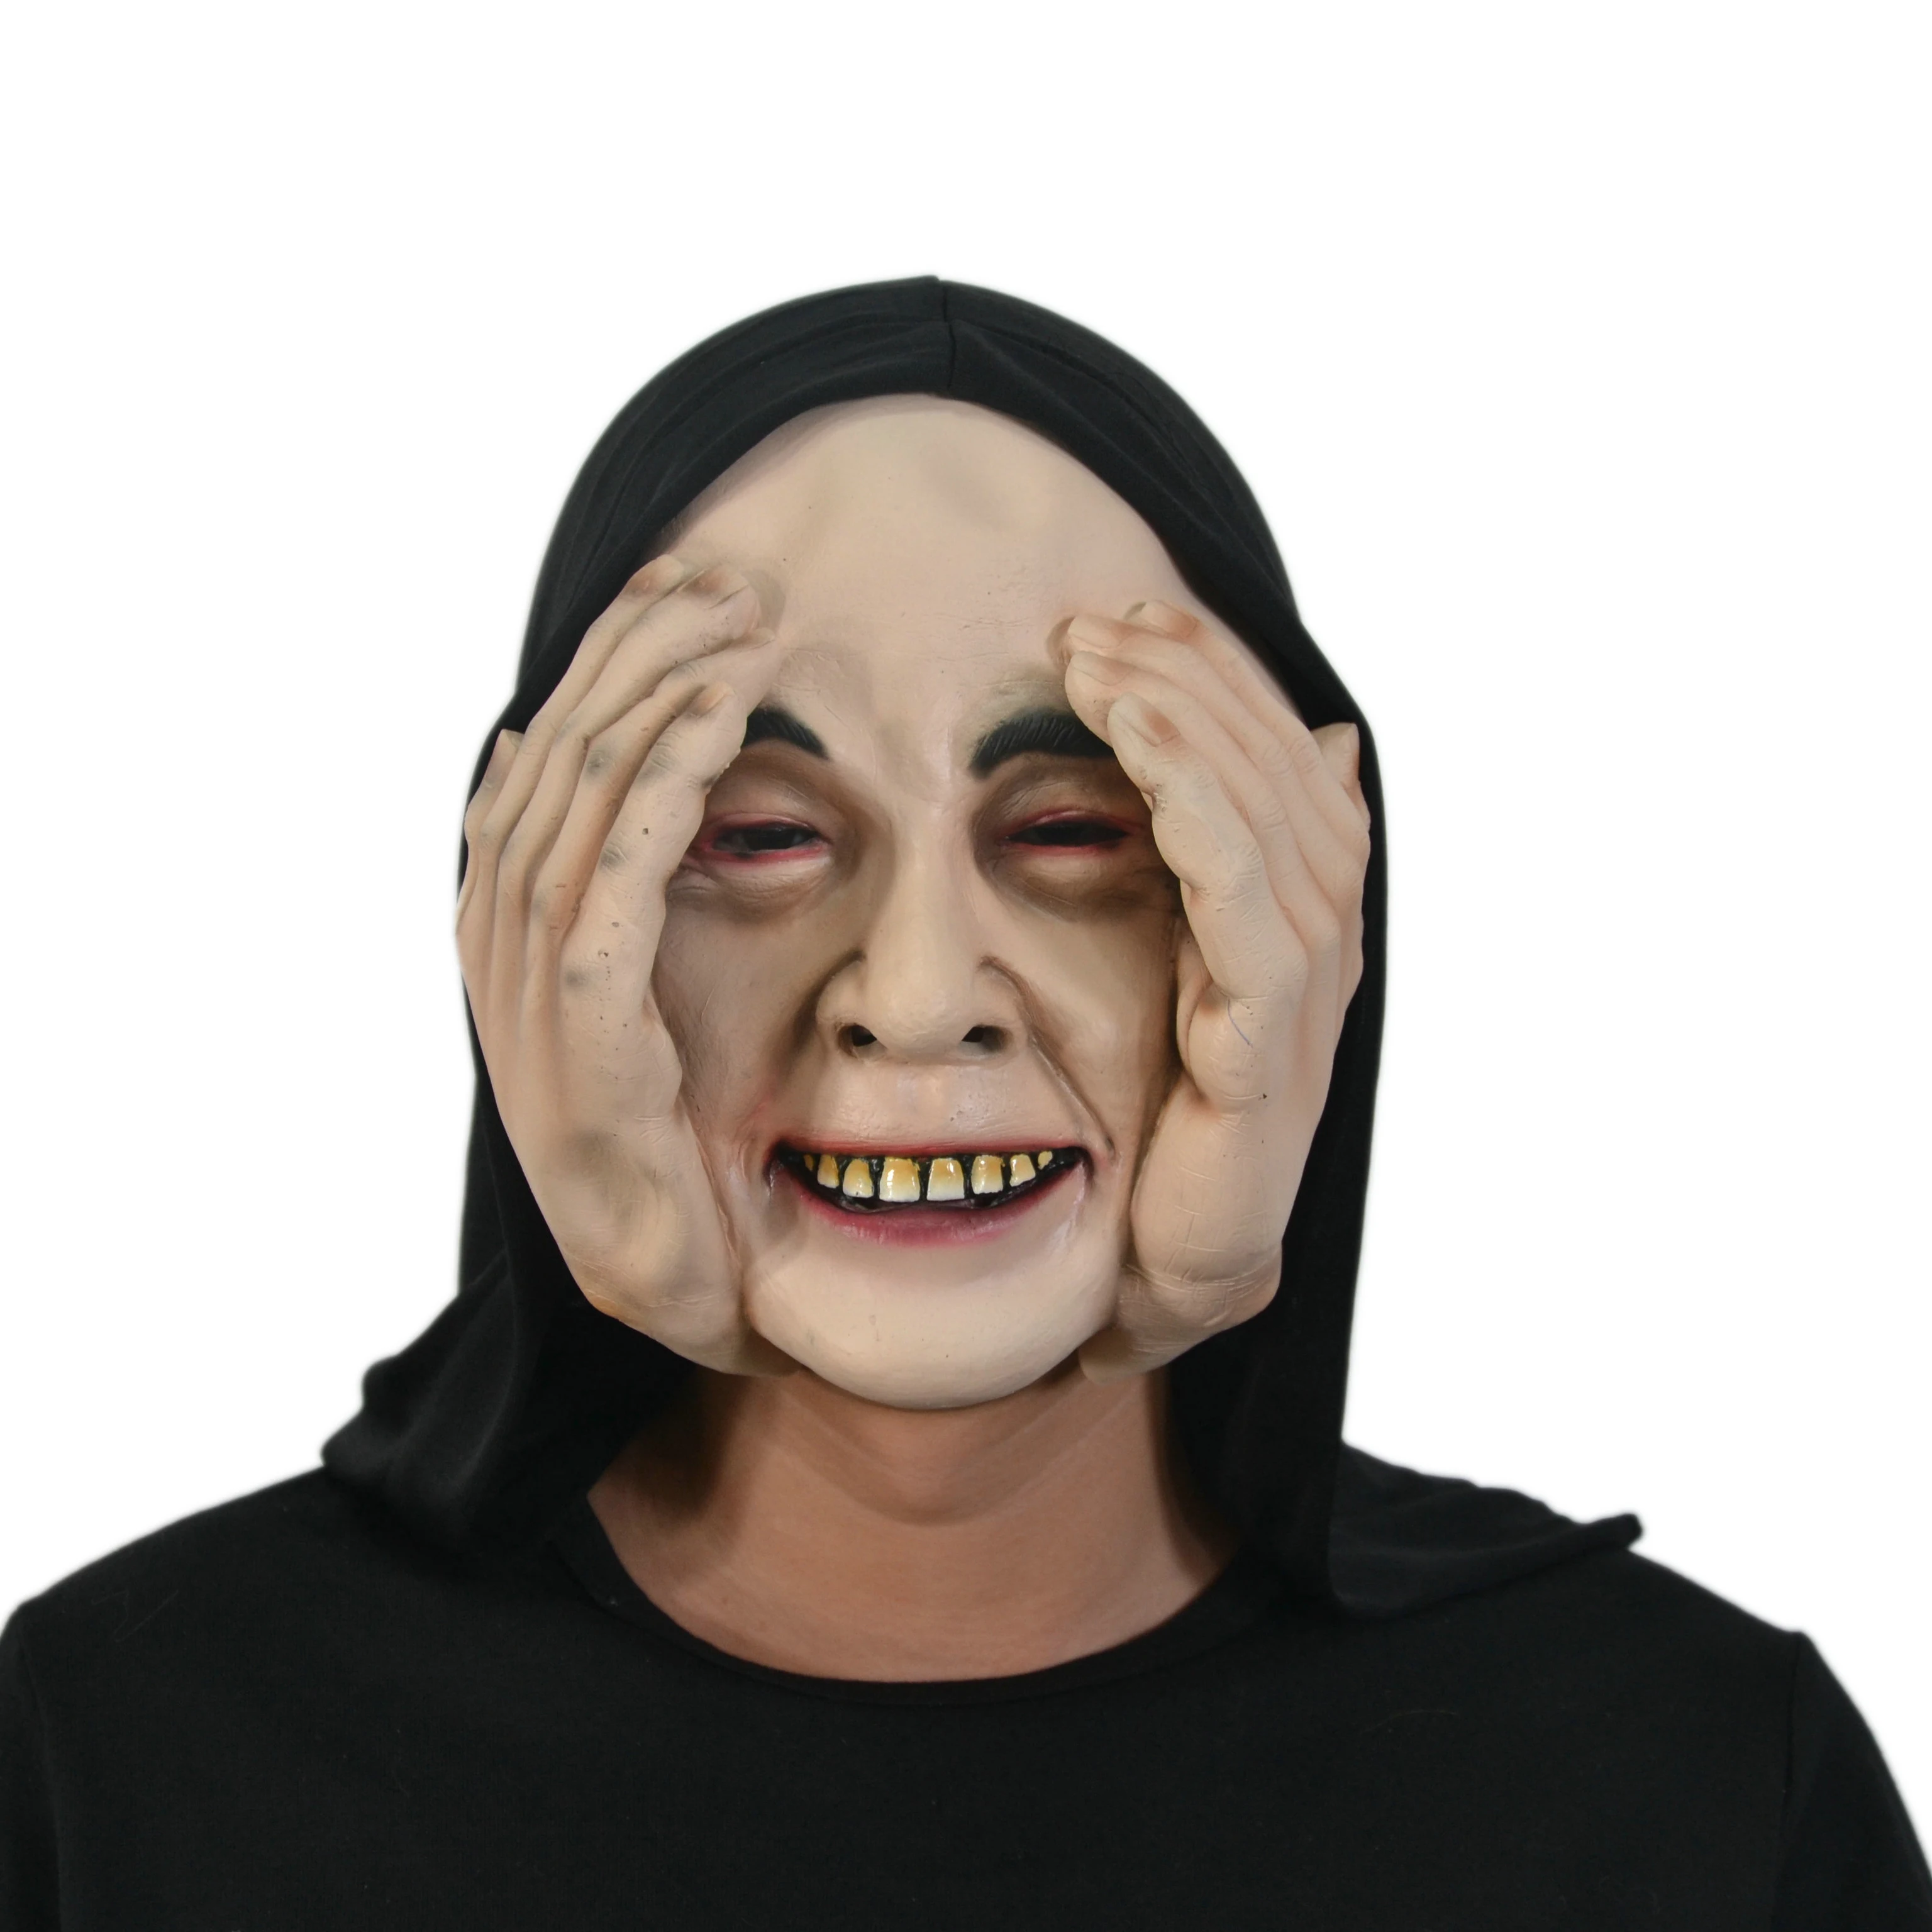 Novelty Realistic Cosplay High Quality Horror Halloween Scary Custom Latex Party Masks For Fun